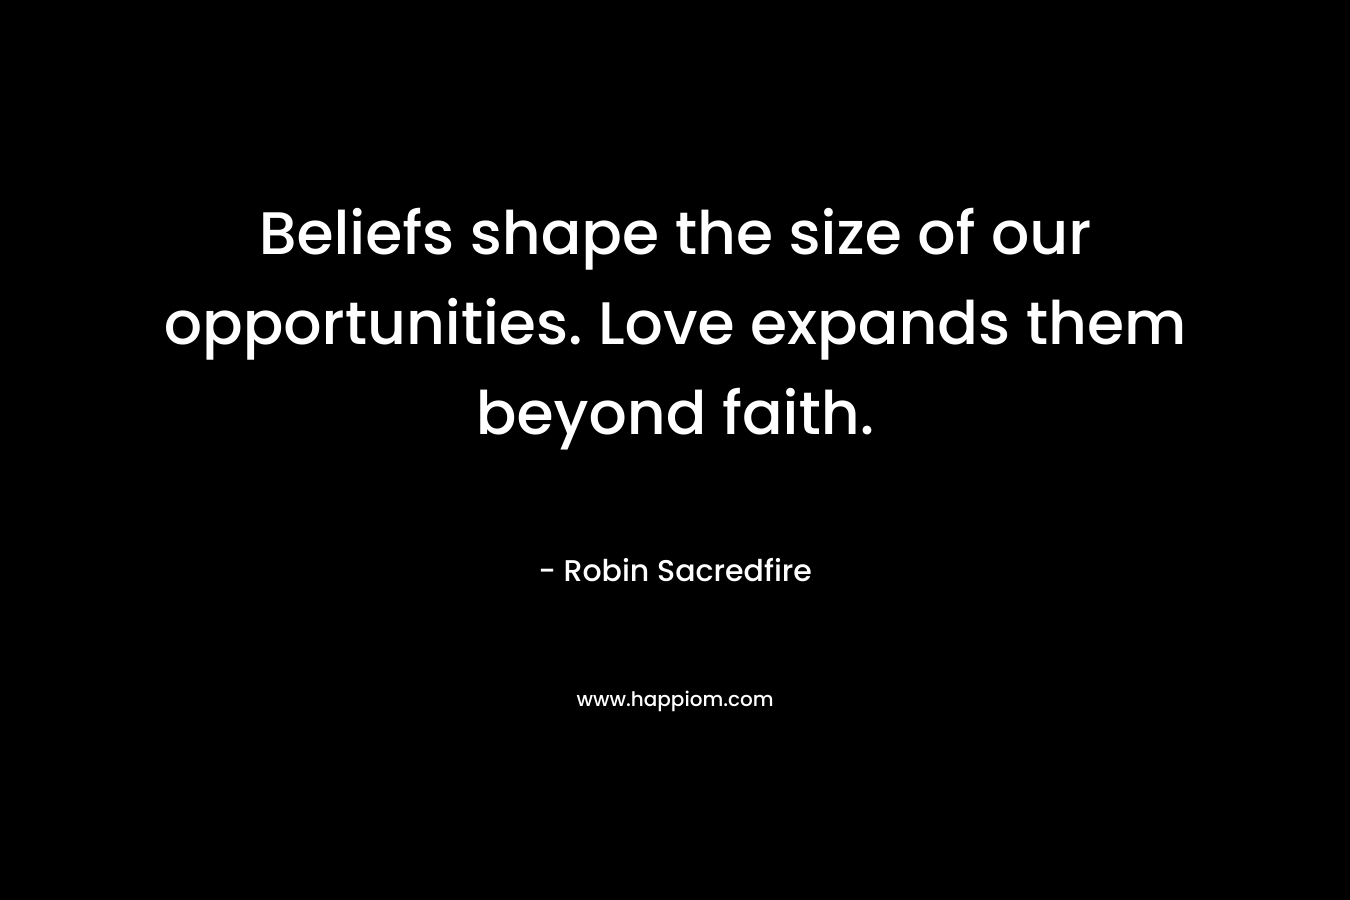 Beliefs shape the size of our opportunities. Love expands them beyond faith. – Robin Sacredfire